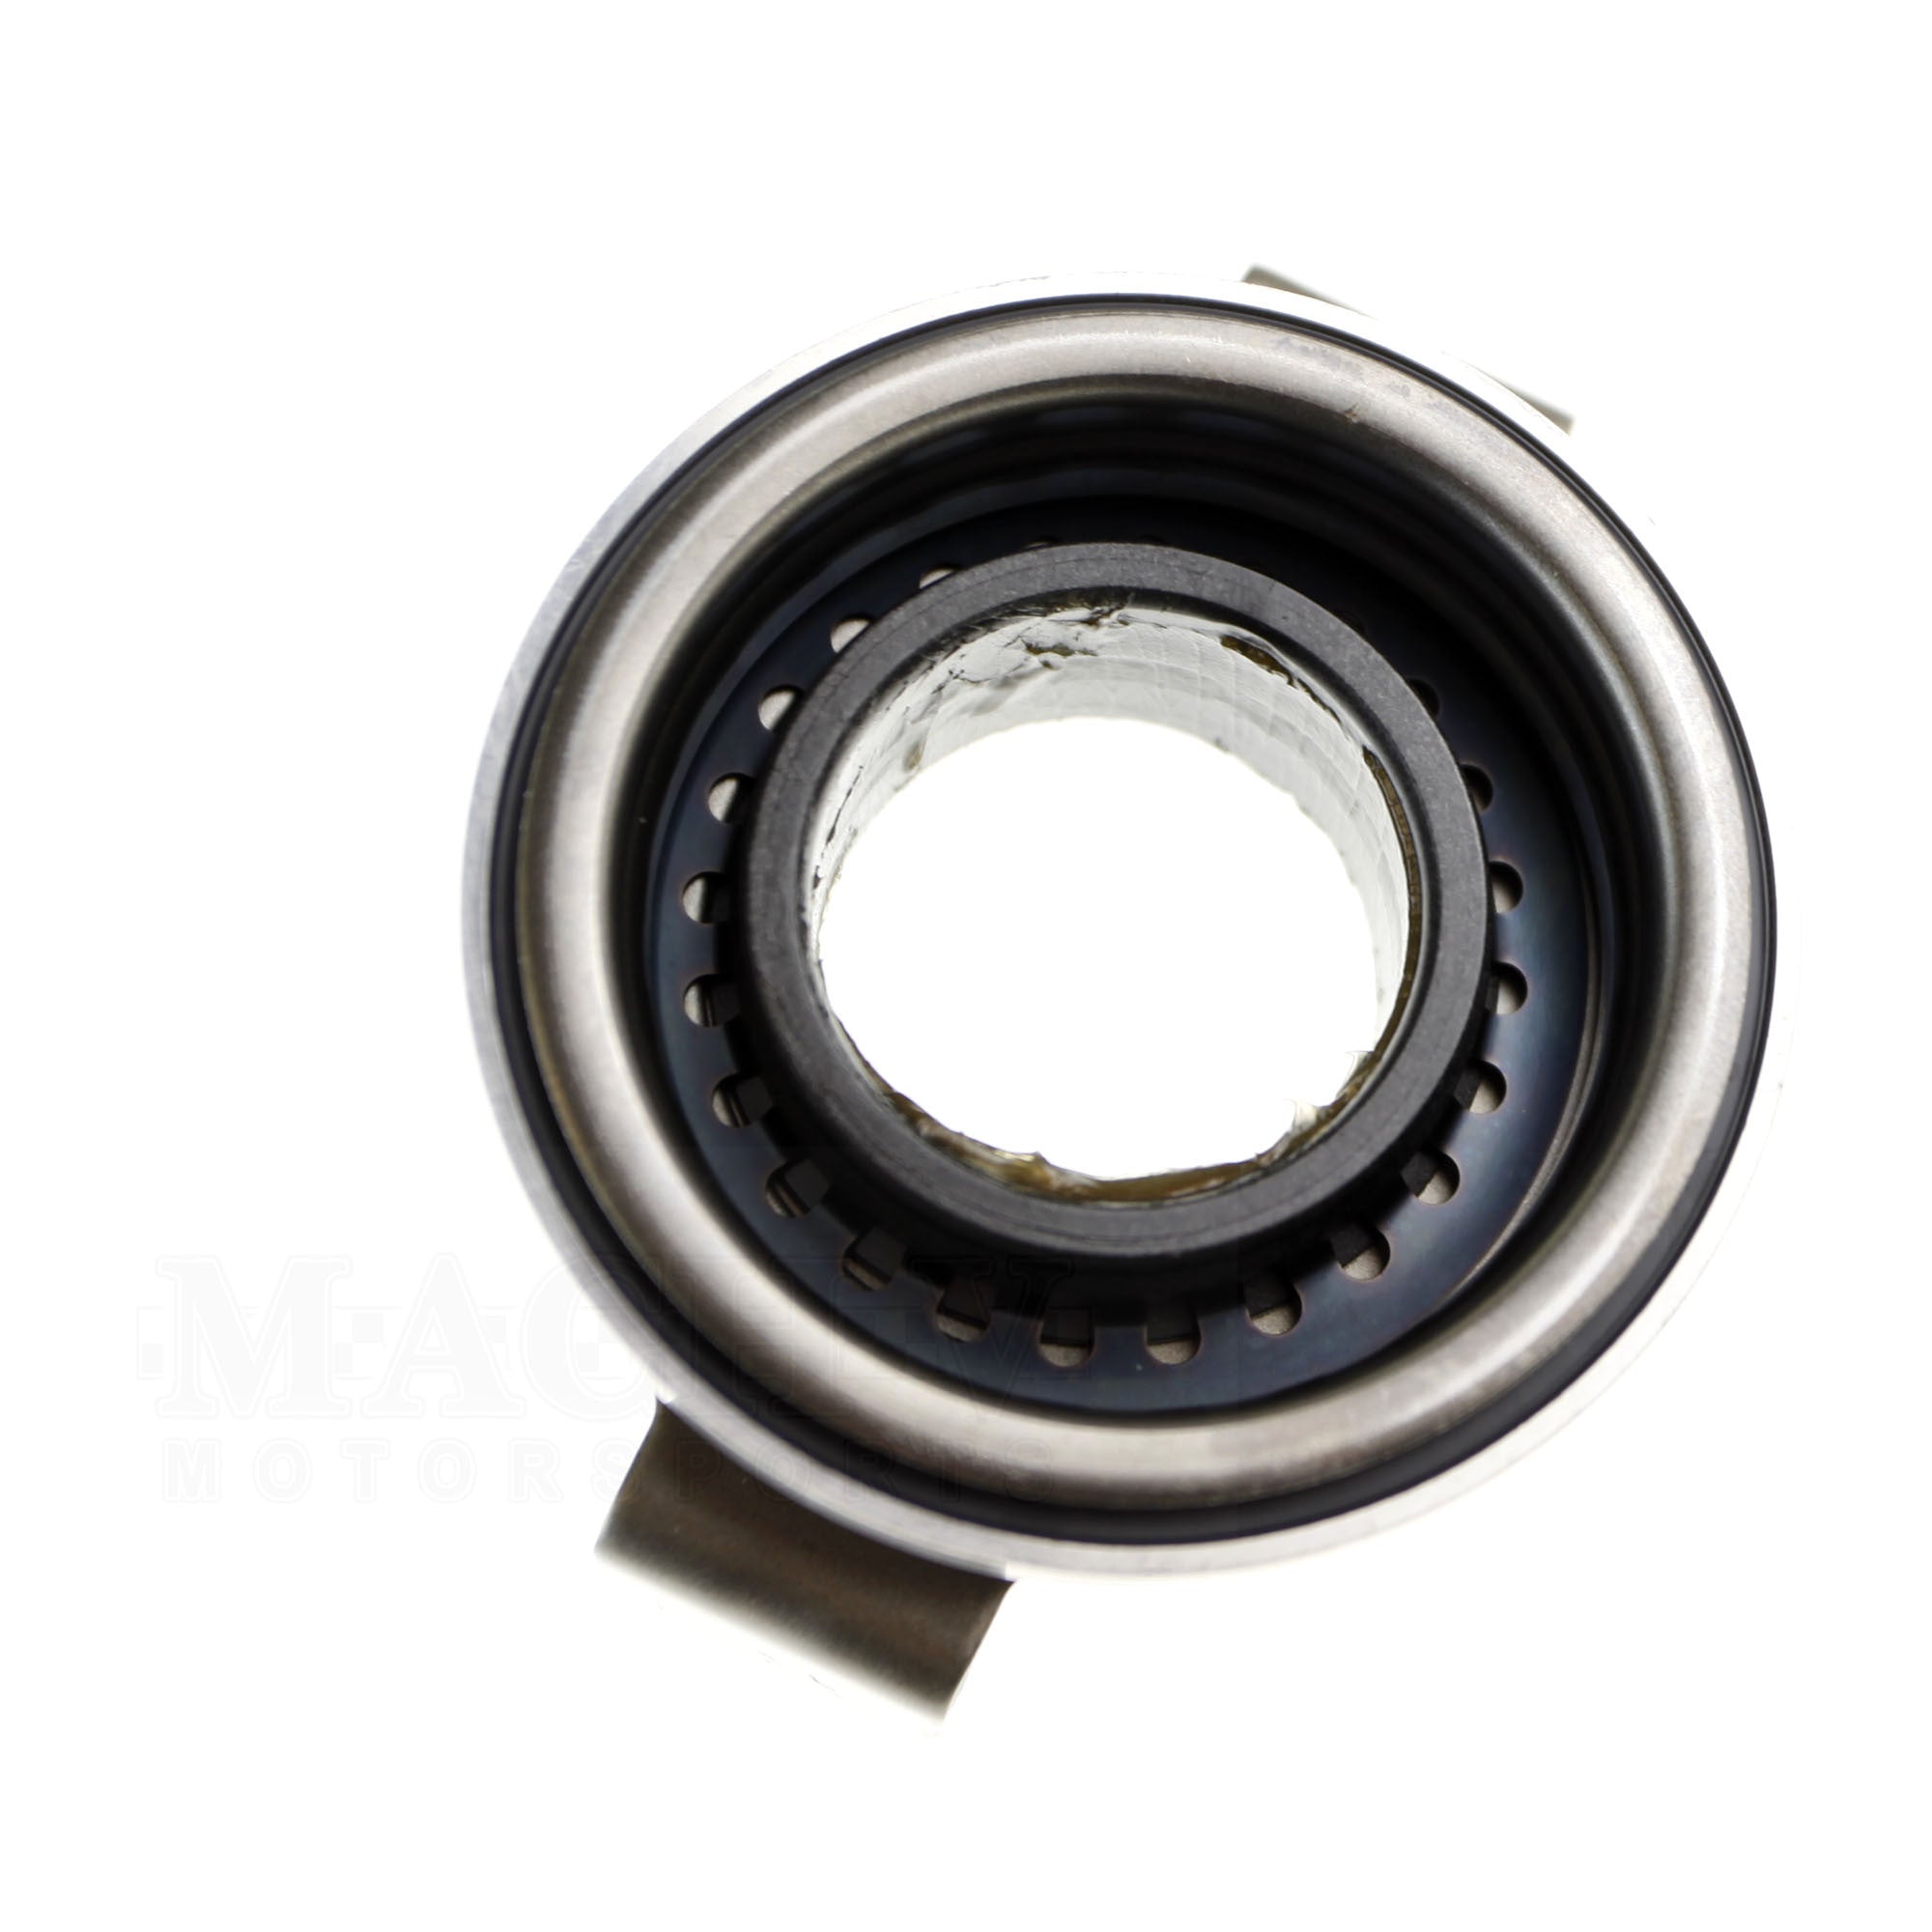 Subaru OEM Quality Throw-Out Bearing 2006-2021 WRX, 2006-2013 Forester XT, 2005-2009 Legacy GT